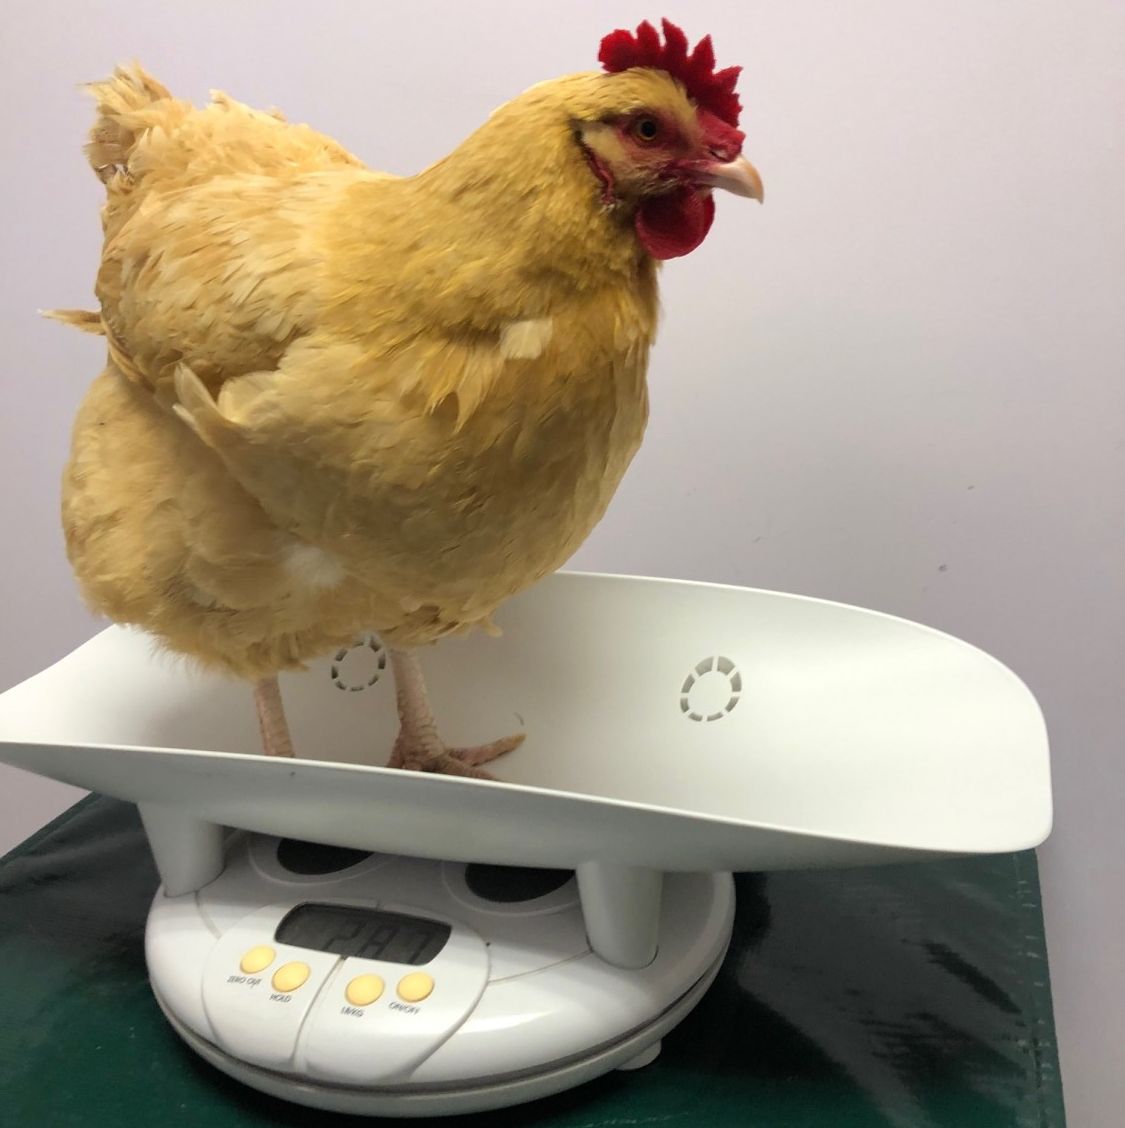 Weighing a Rooster